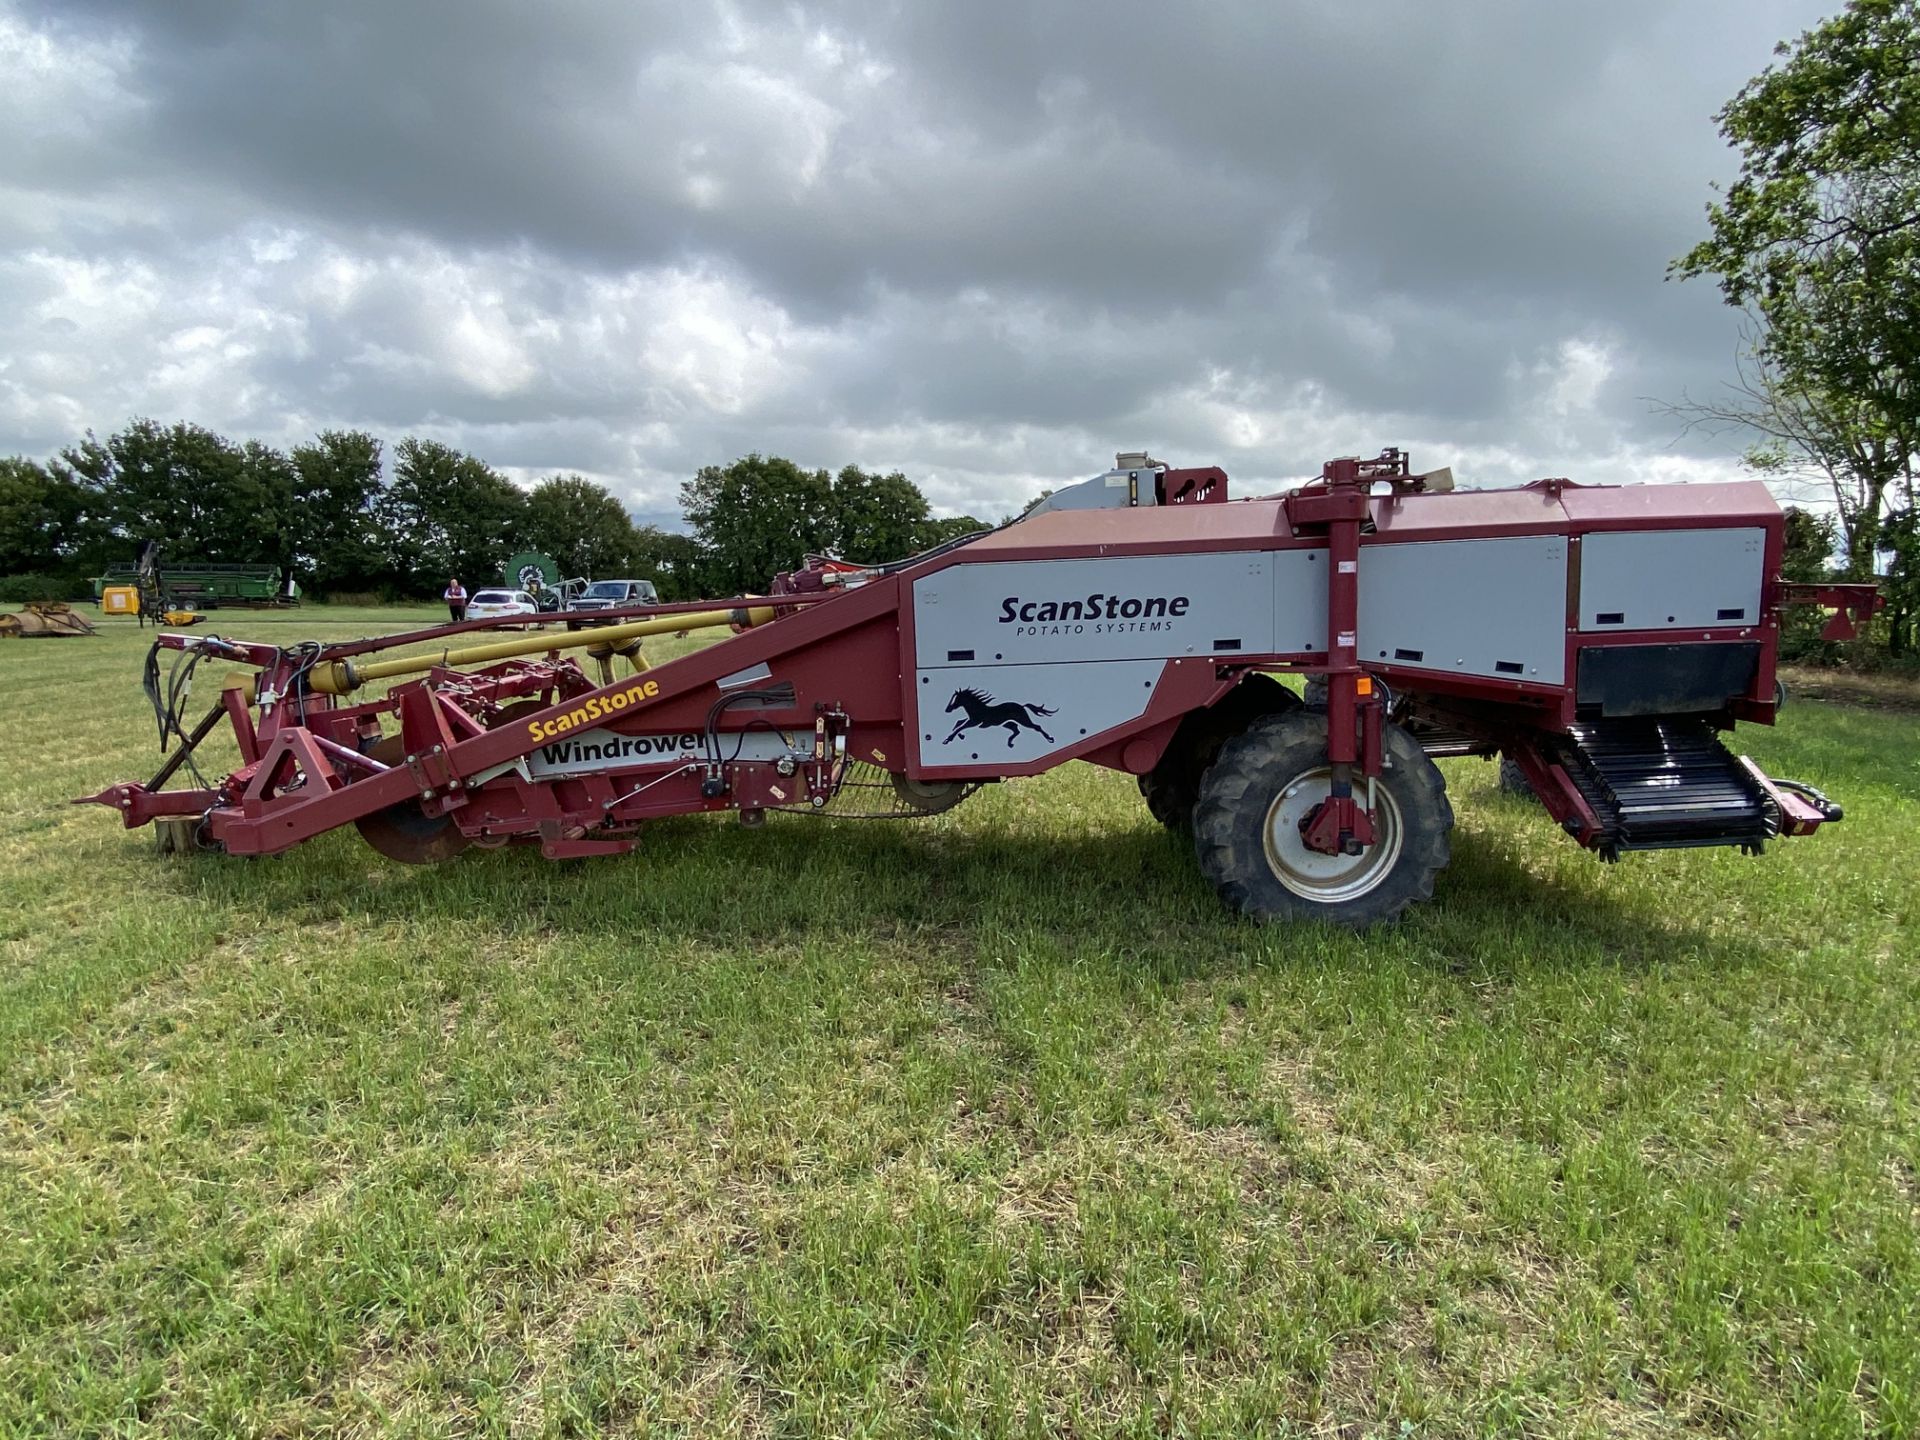 Scanstone trailed Windrower. Model WD17-2+5. 2014. Serial number 2030. Set for 72" beds. LM - Image 4 of 29